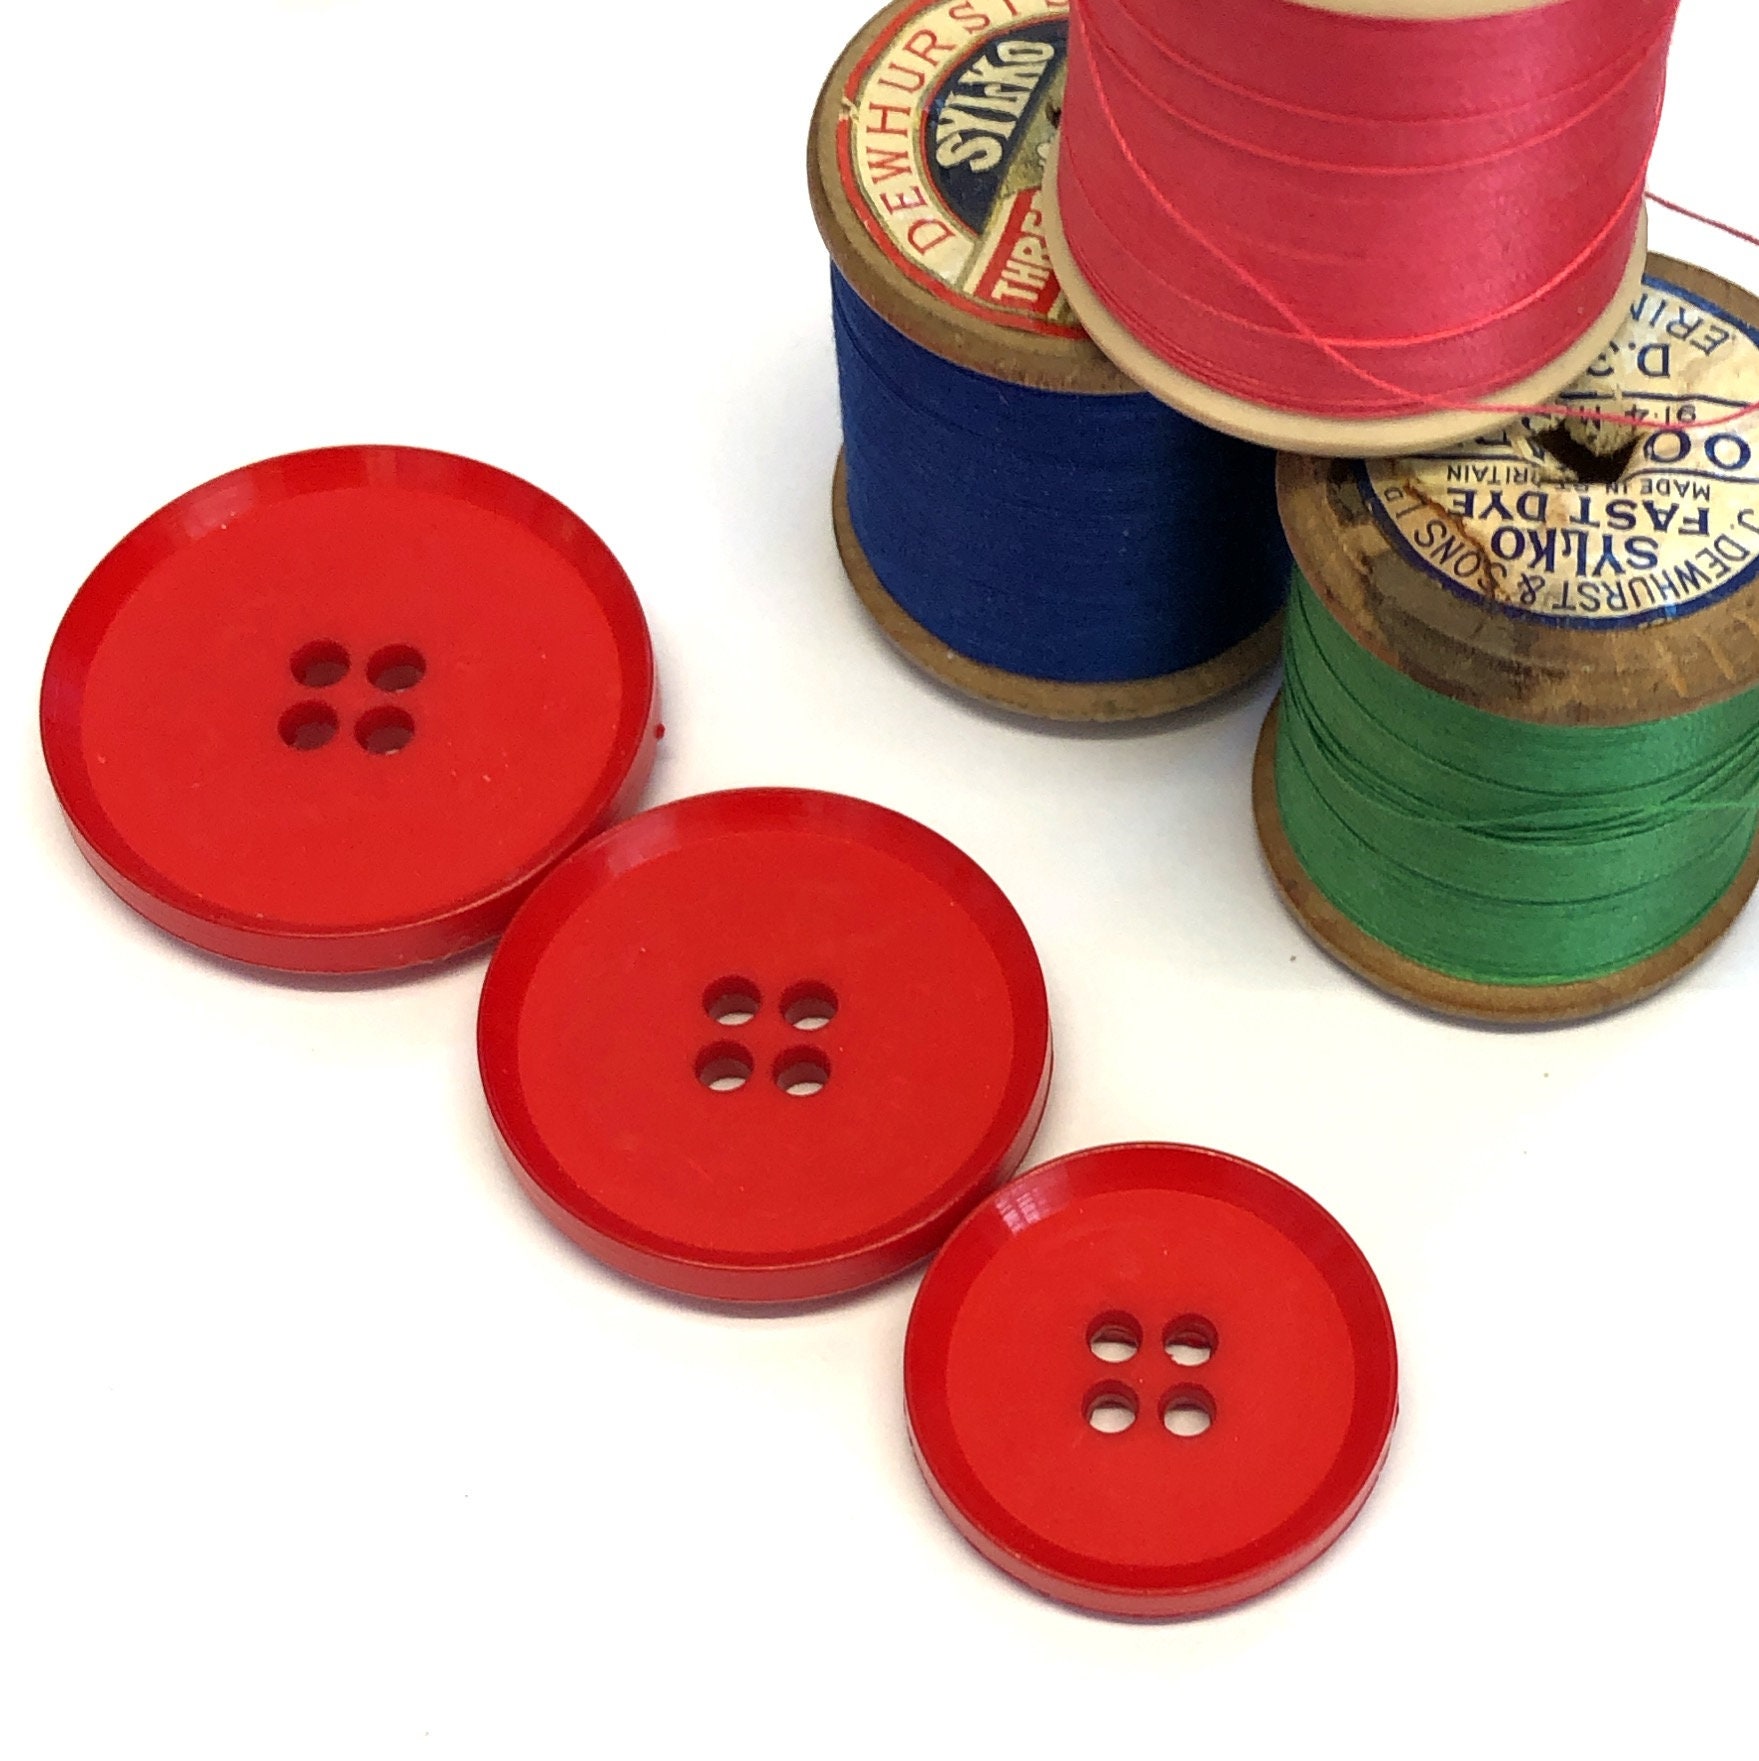 Giant RED Buttons, 6.5cm Super Xl Plastic Buttons, Extra Large Christmas  Buttons, Huge RED Button, 5x Super Sized Red Buttons, UK Shop, 